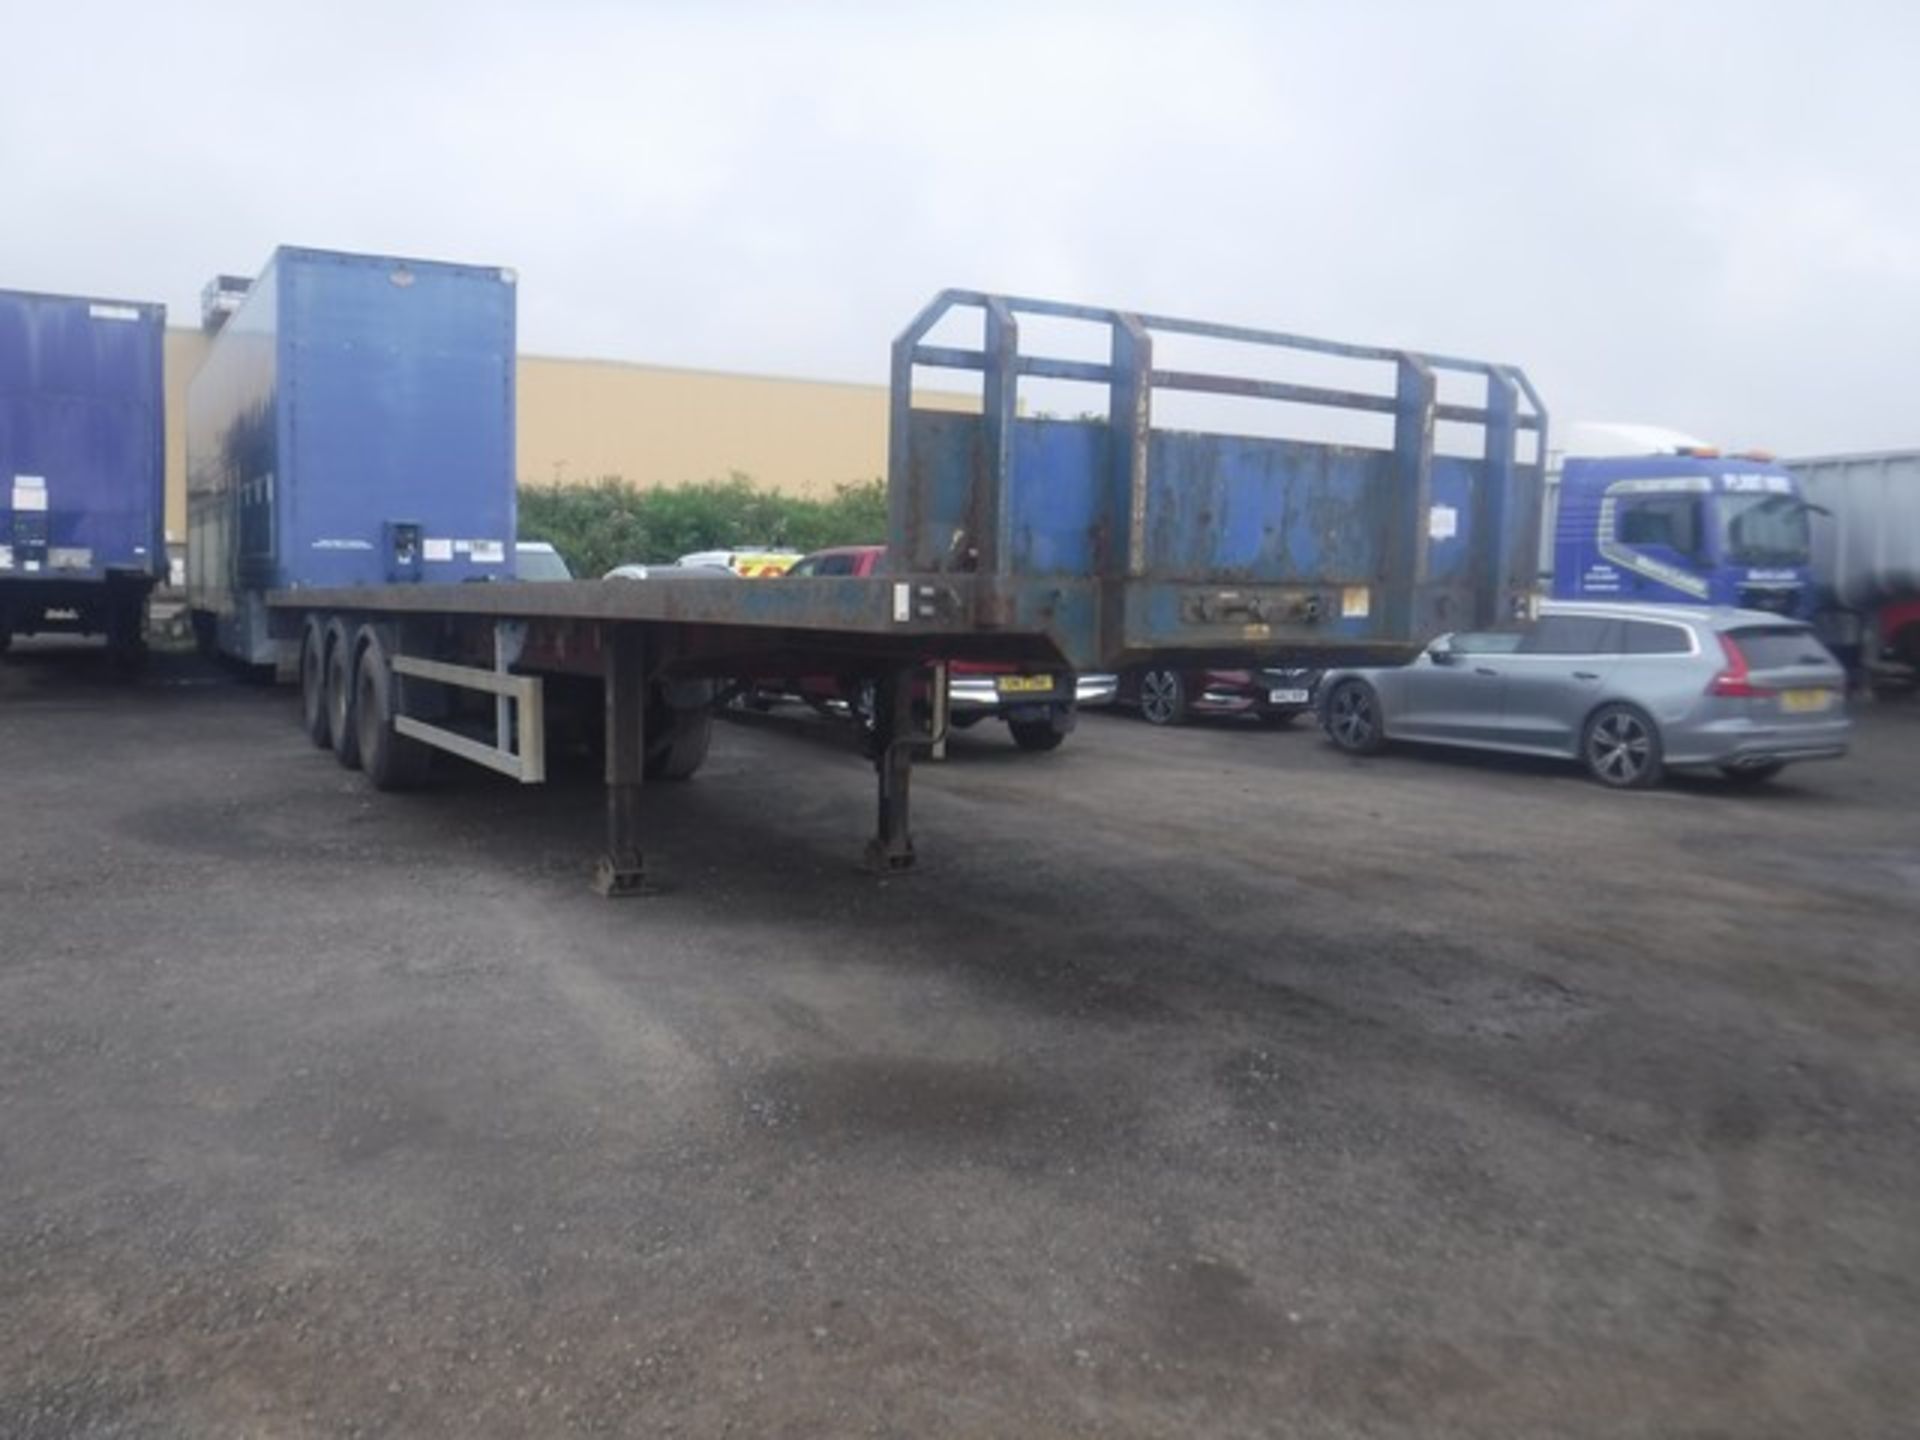 FLATBED TRAILER DRM7 2005 MONTRACON 3 AXLE ON AIR SUSPENSION MOT - NOV 2019 - Image 2 of 6